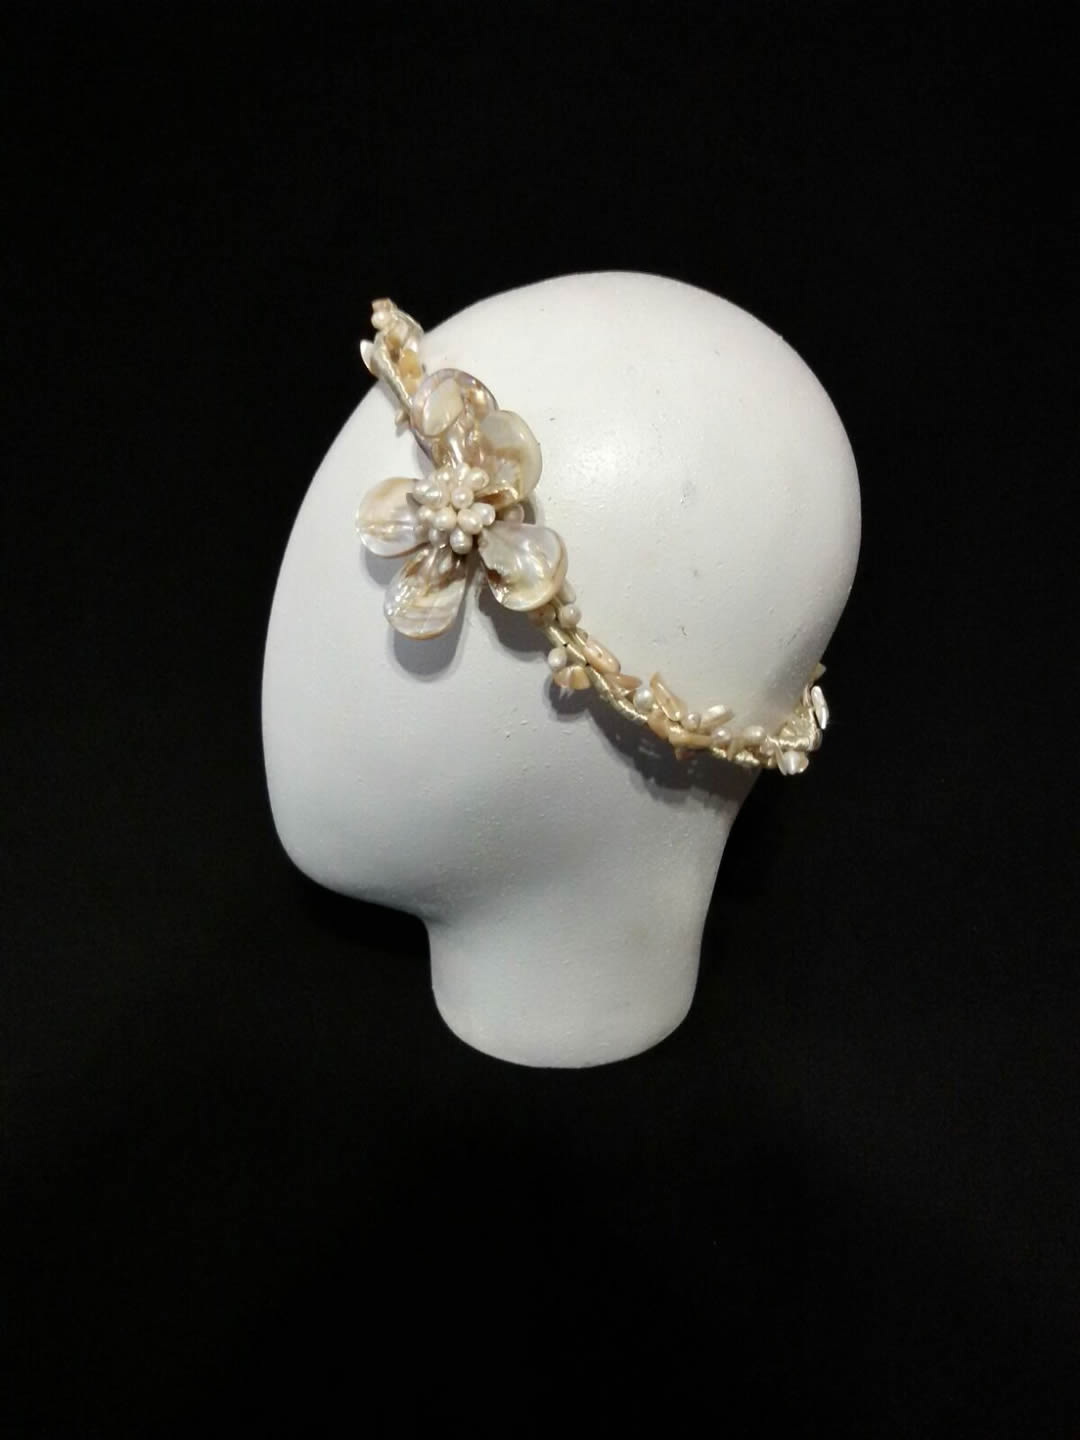 Wired fascinator made of mother of pearl